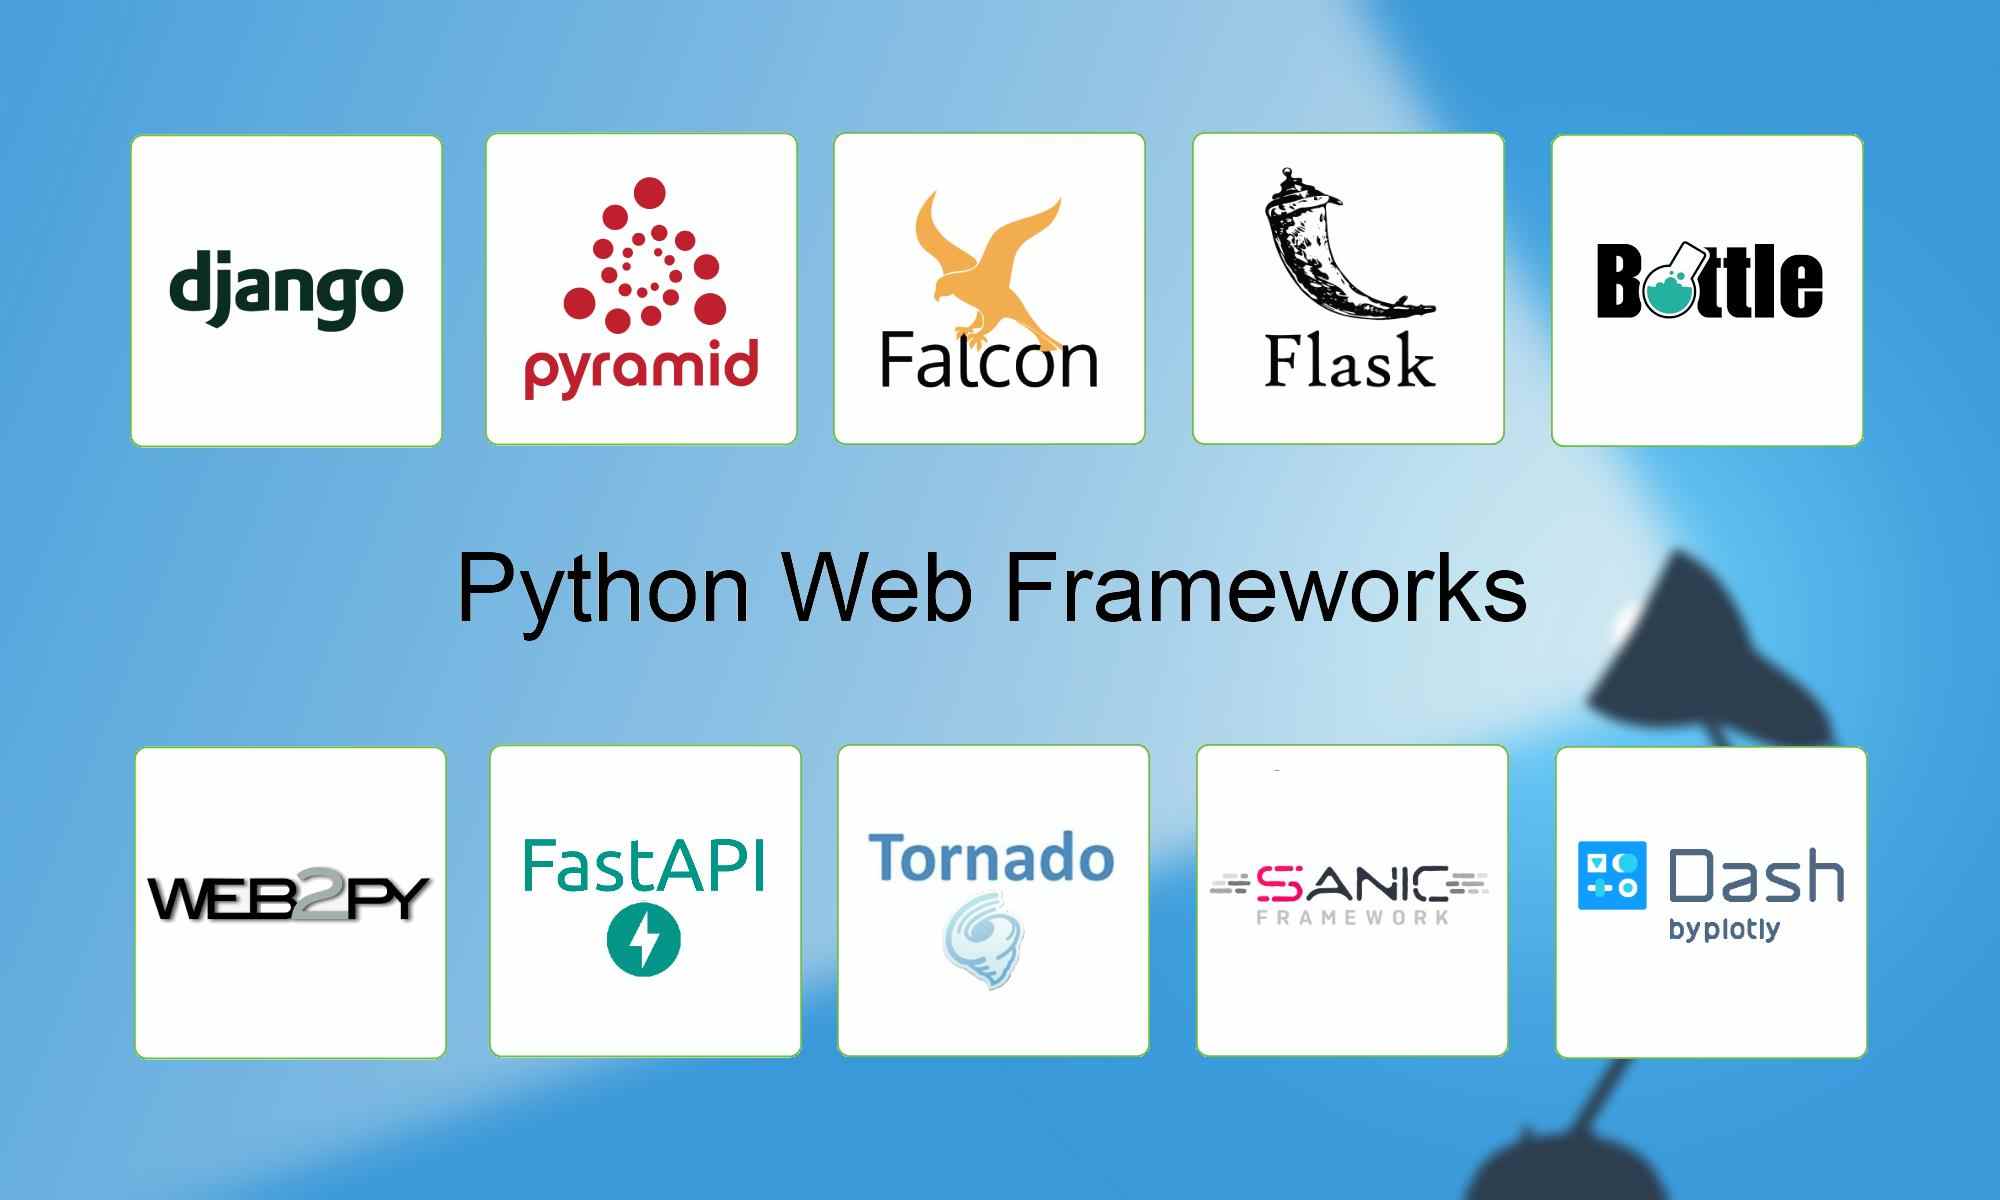 Which Python framework has the best performance?